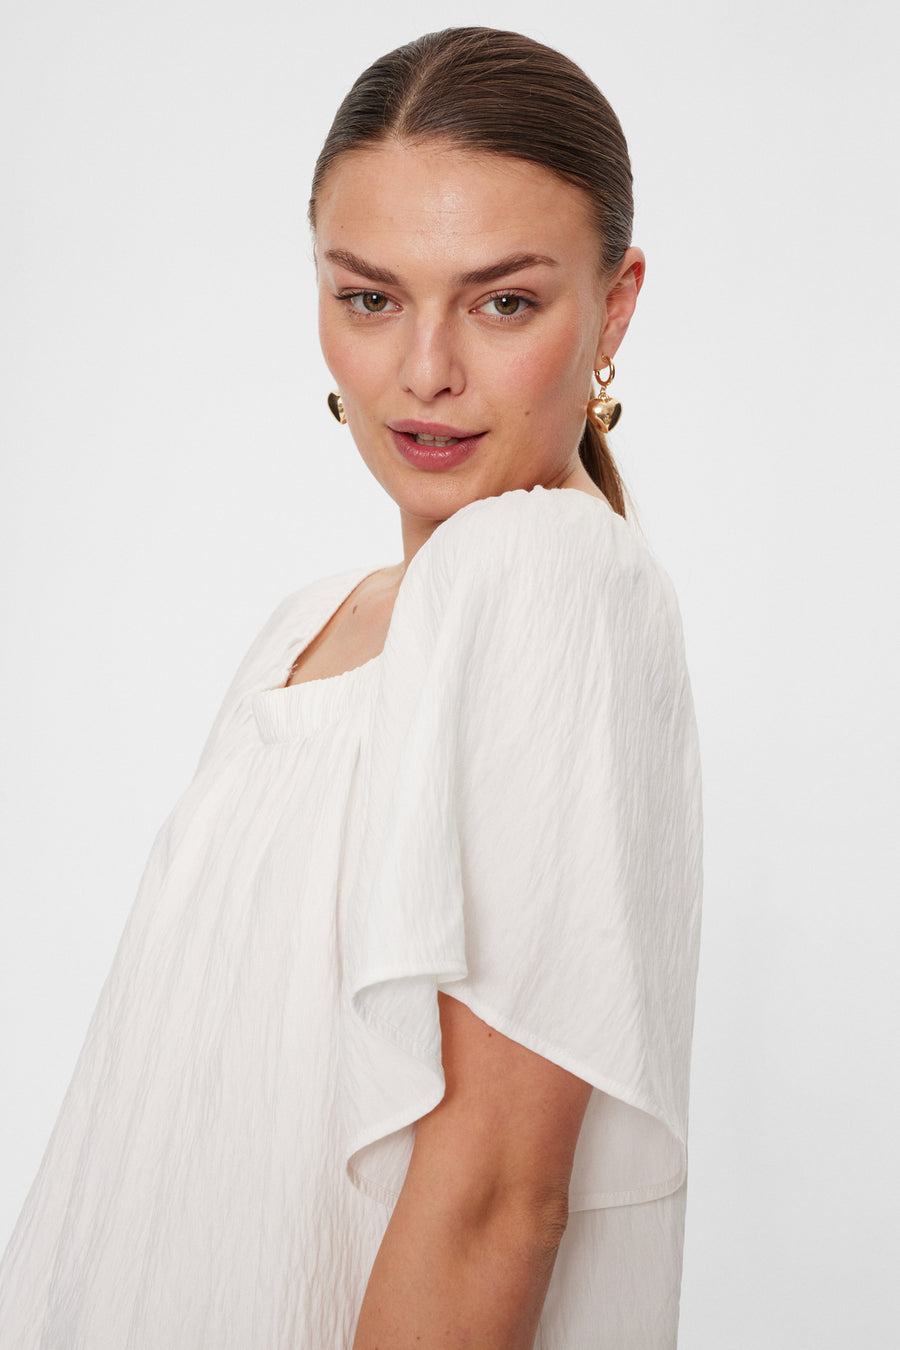 FQALLY - BLOUSE - WHITE